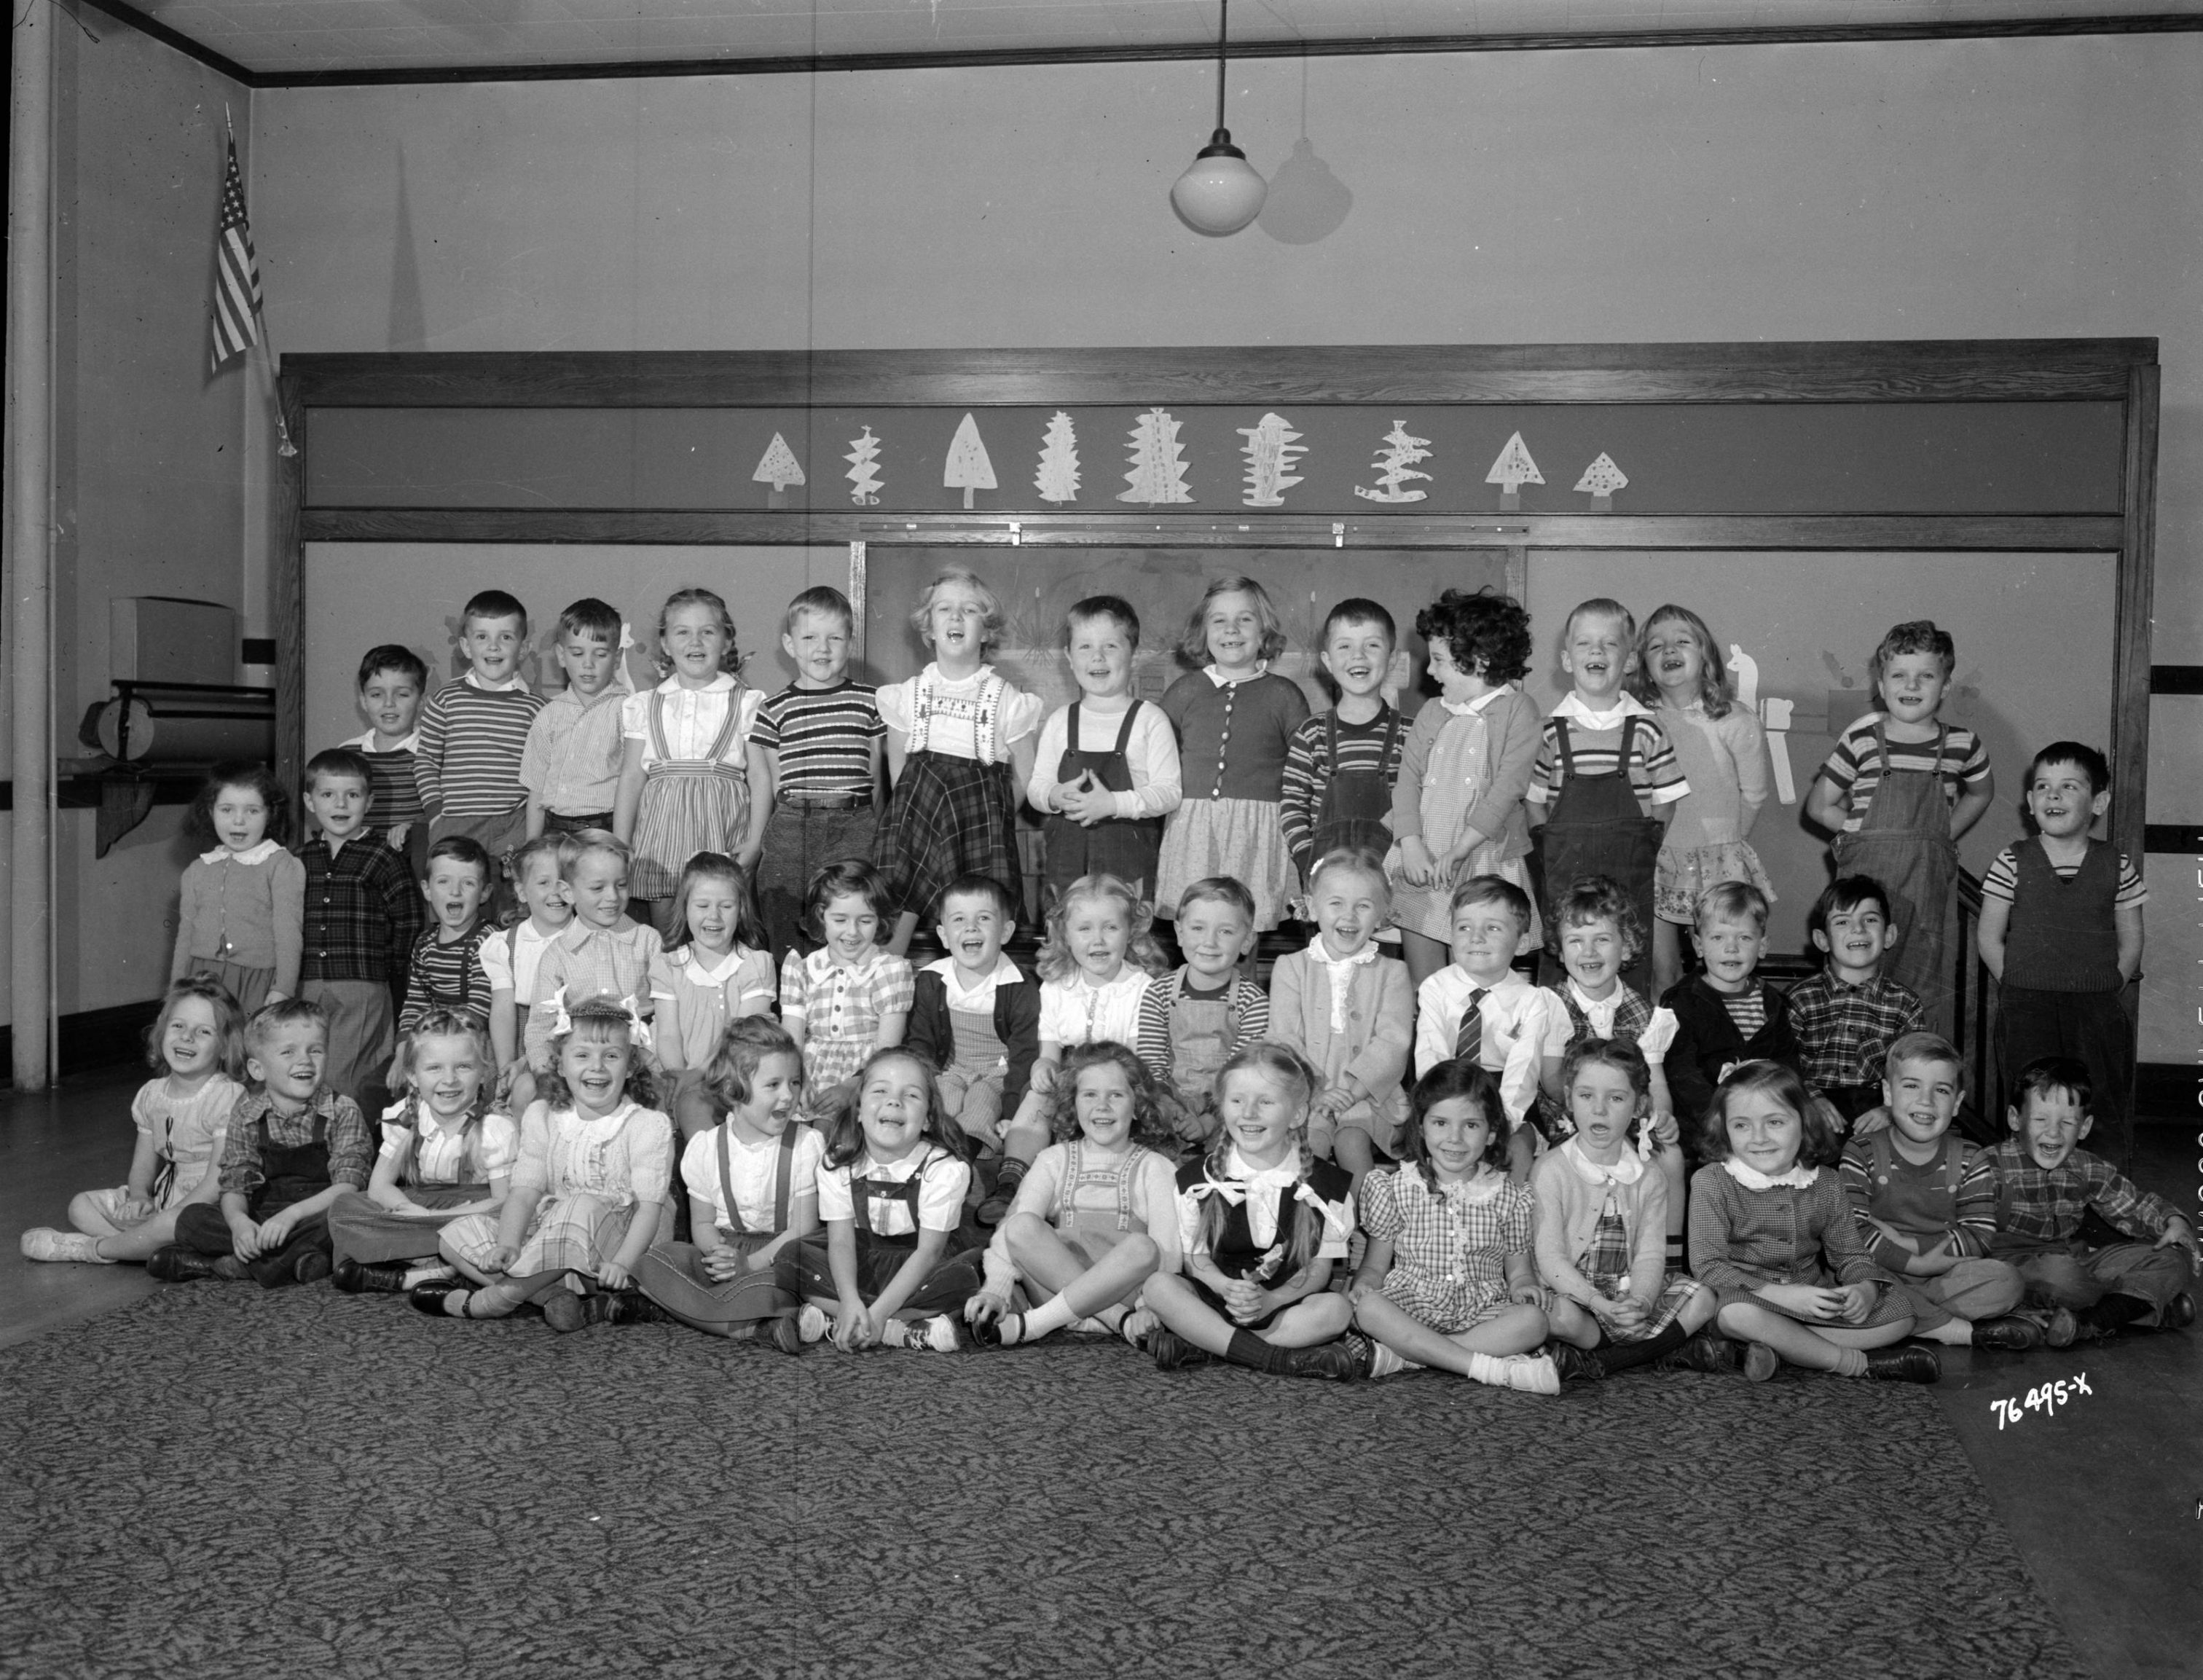 Kindergarten students are gathered together for a group photograph at Cumberland School in 1946. Today, Cumberland Elementary School is part of the Whitefish Bay School District.